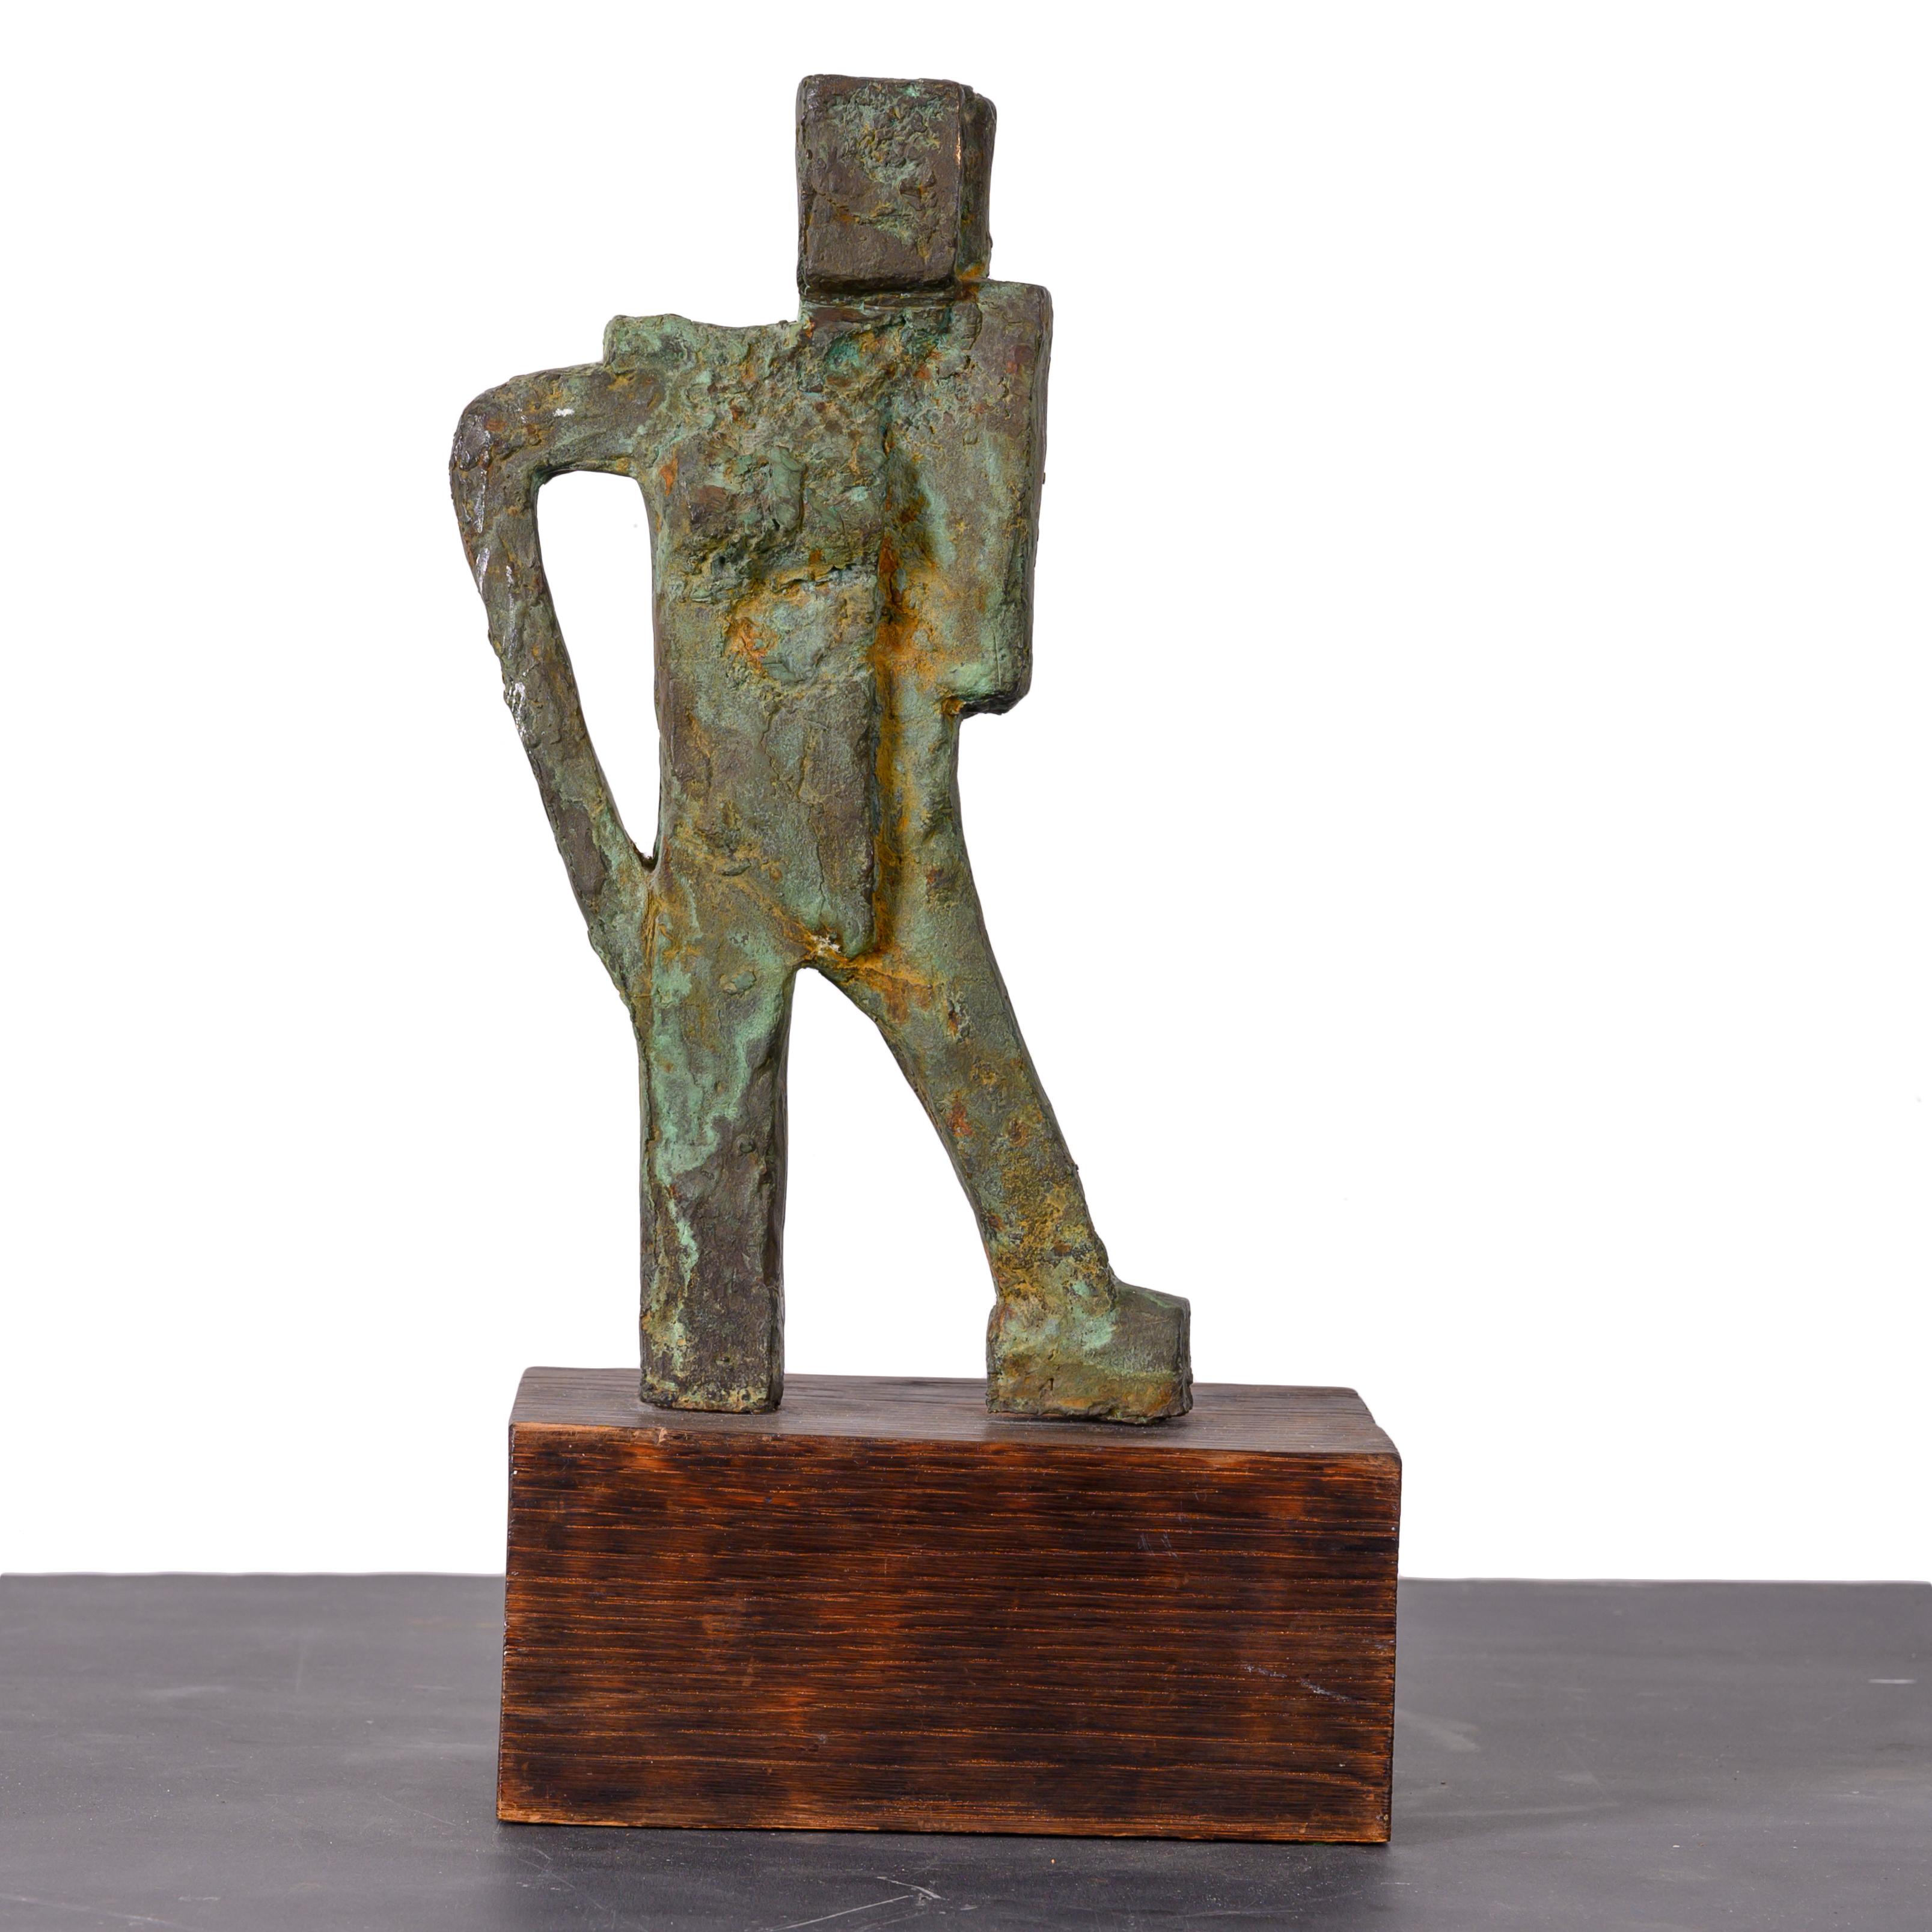 A brutalist bronze figural sculpture on oak base.

7 ½ inches wide by 4 inches deep by 13 inches tall
